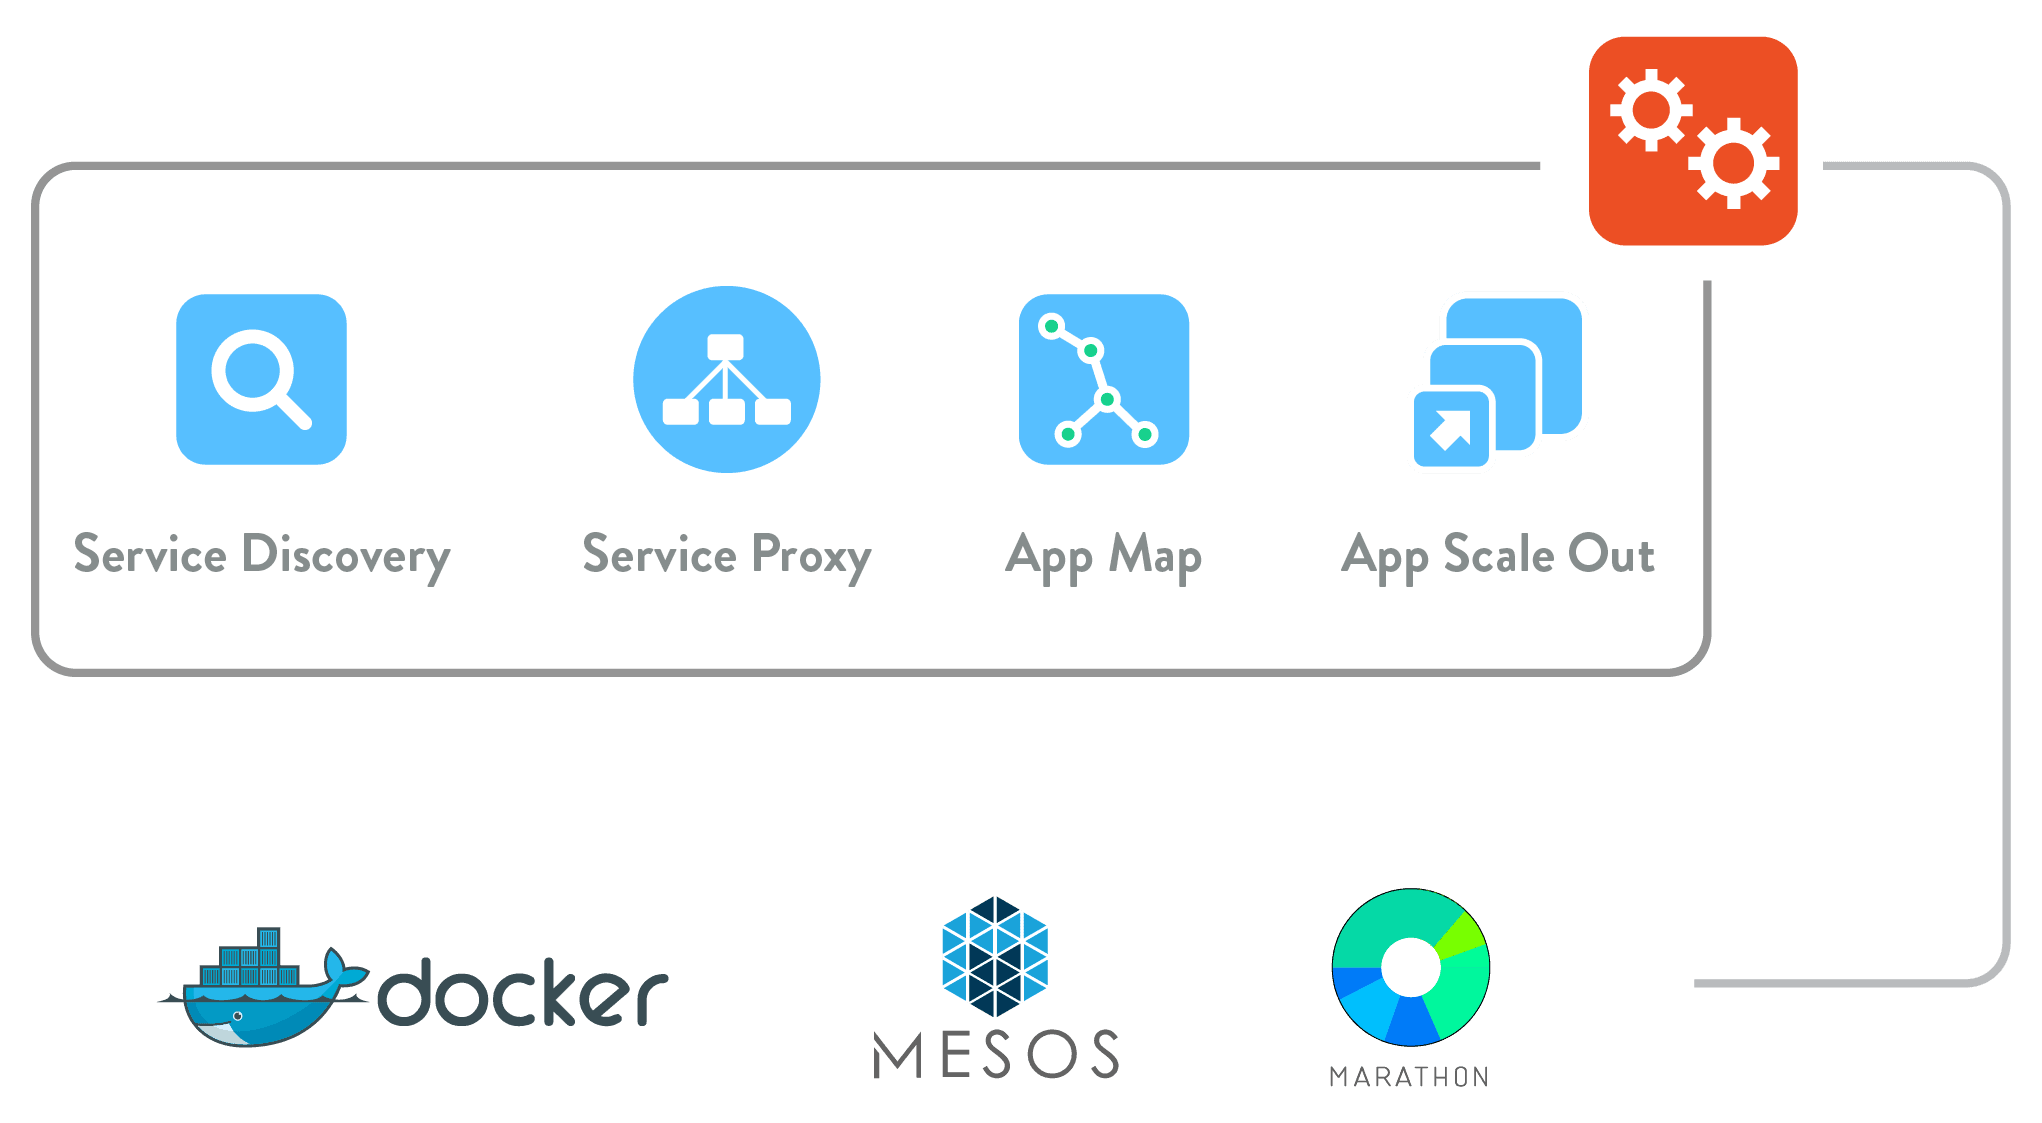 Diagram depicts a container services fabric providing service discovery, service proxy, application maps and application scaling for applications running in containerized environments such as docker.